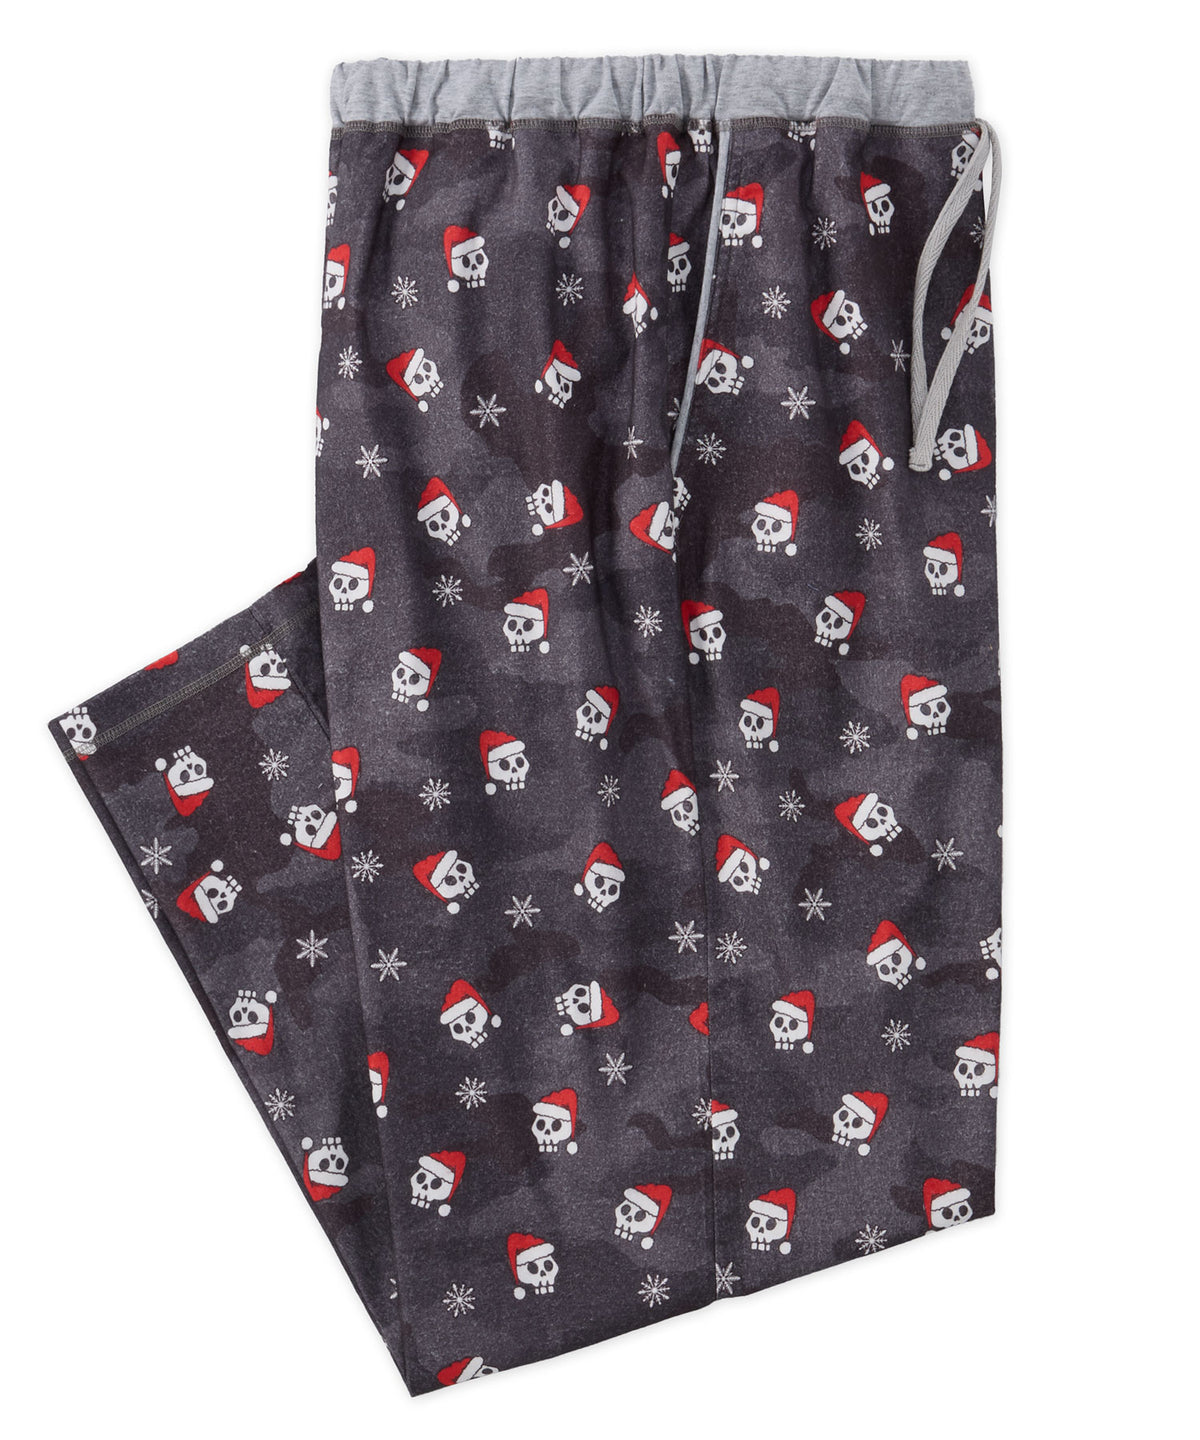 Mickey Mouse Holiday Plaid Pajama Pants for Men